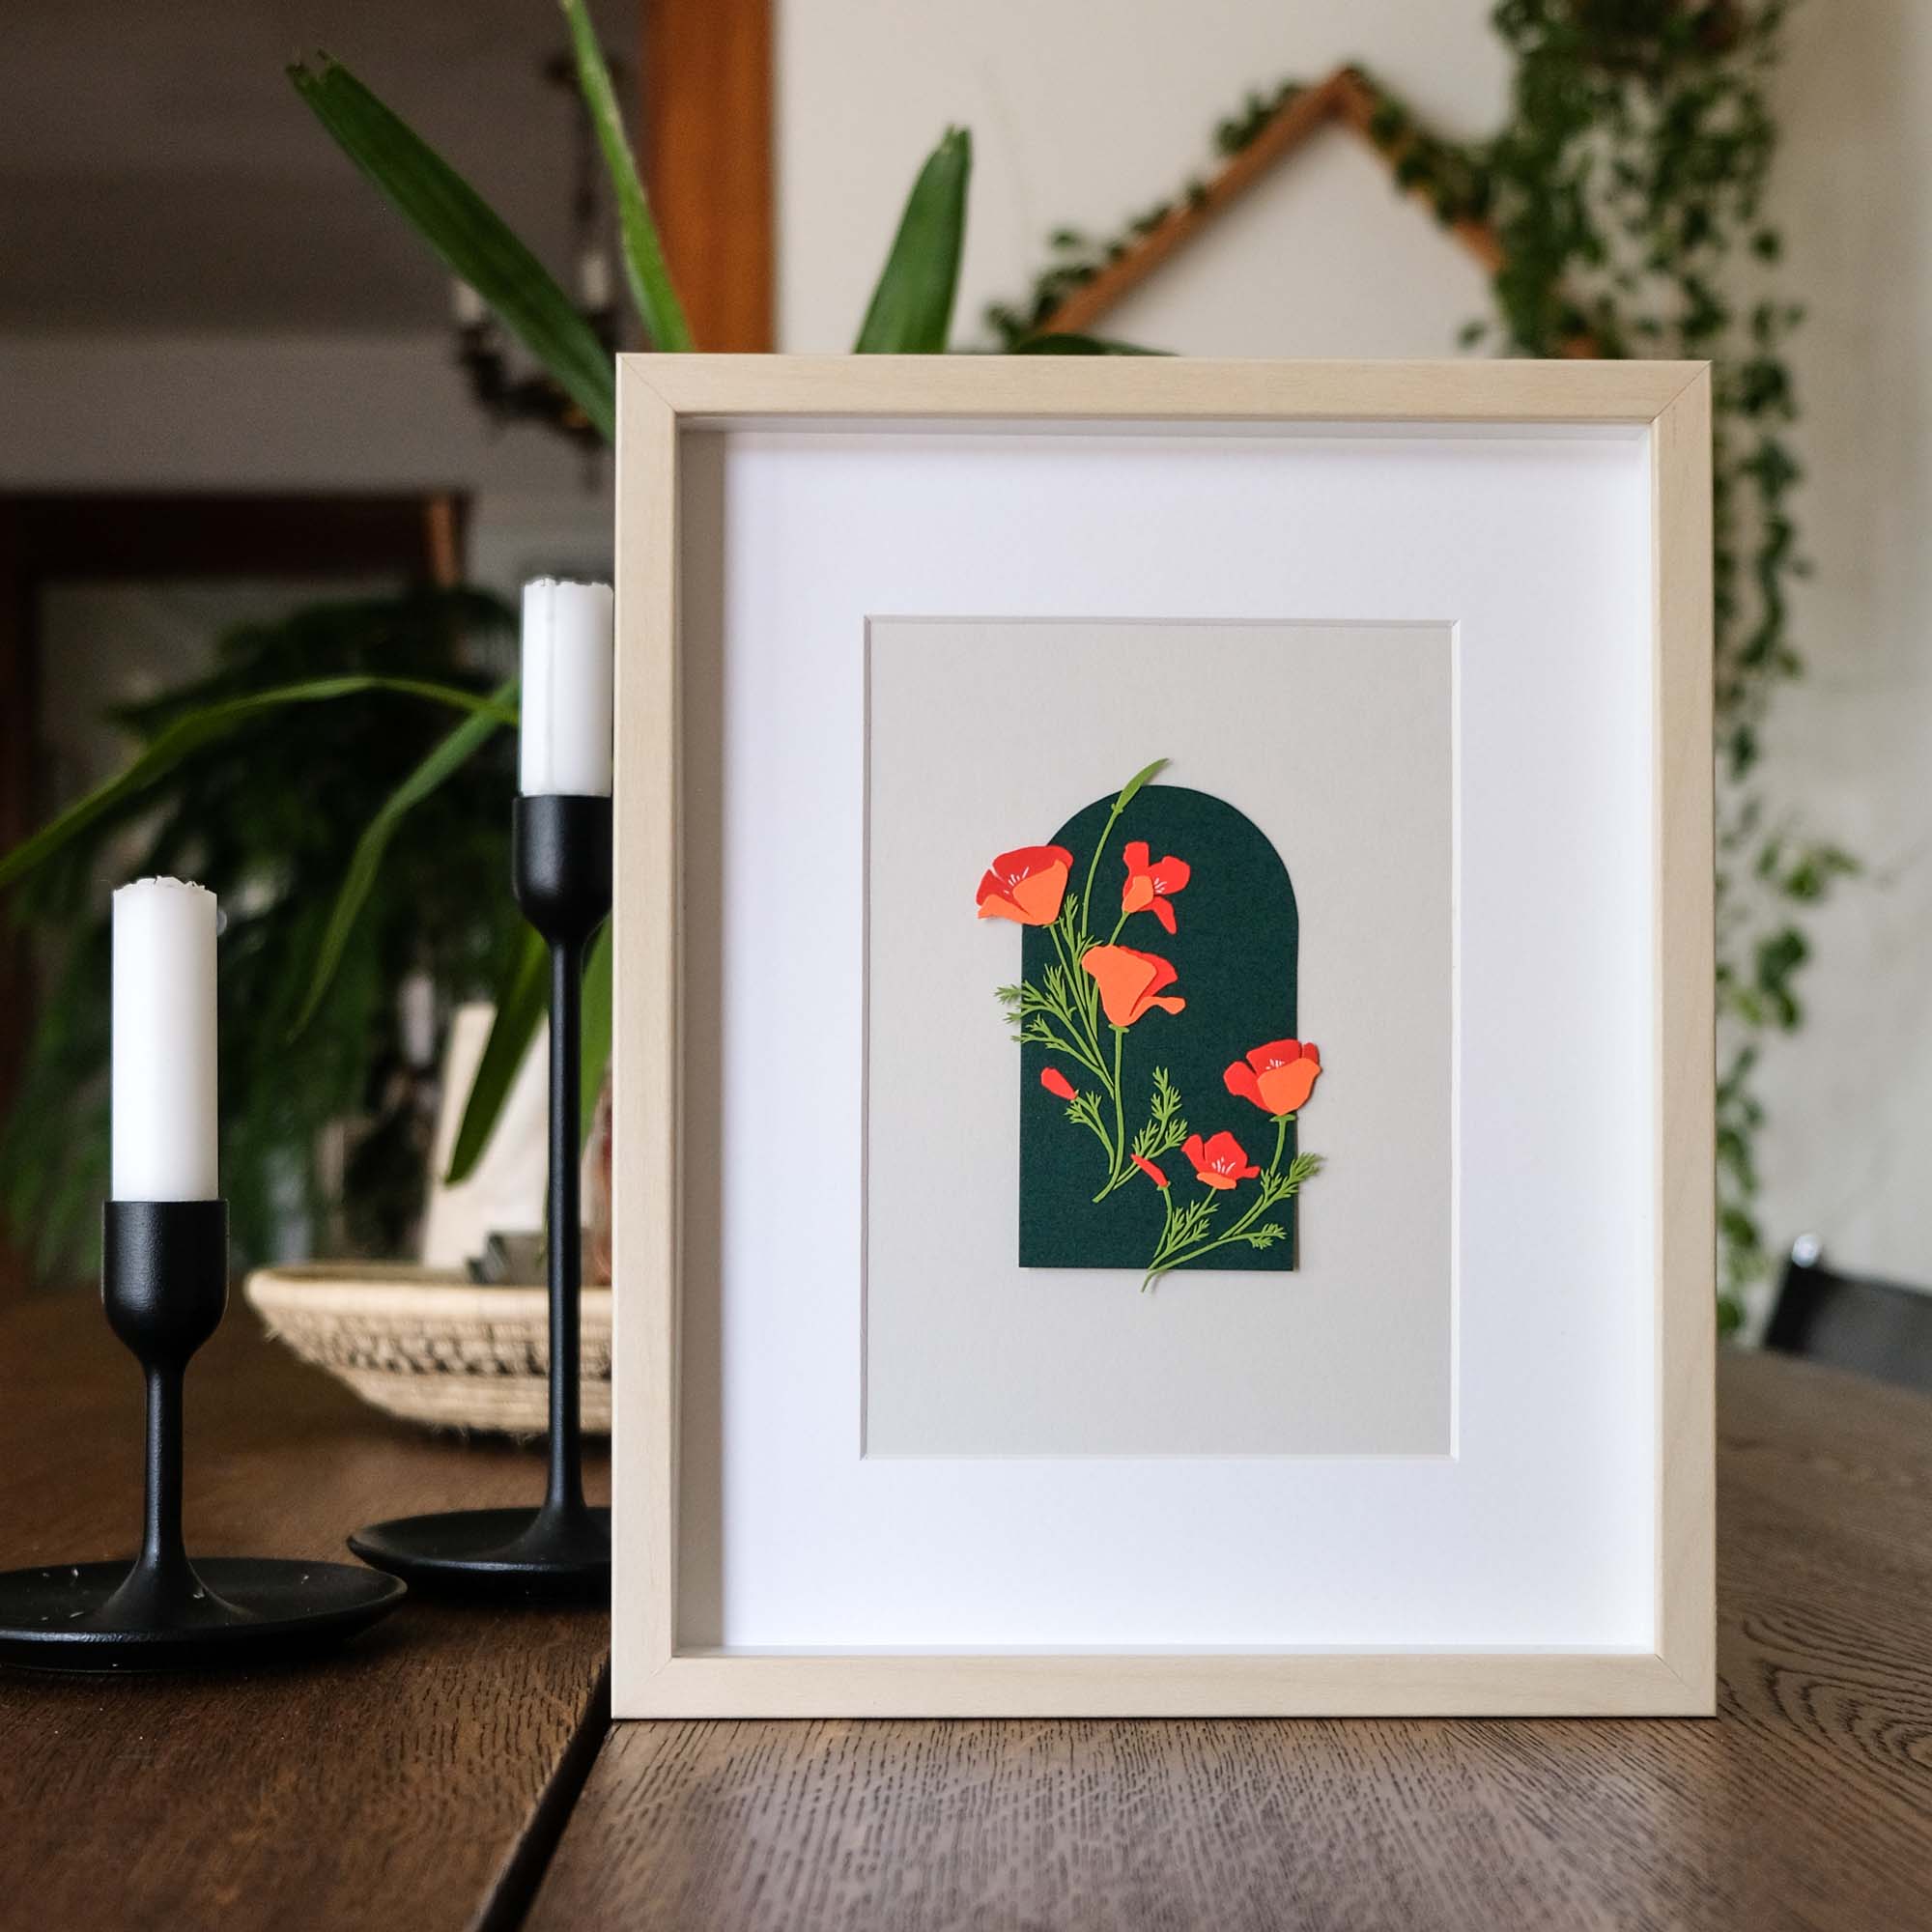 Paper California poppy flowers sit on an arched dark green background. The artwork is framed on a wood table next to candles and houseplants.